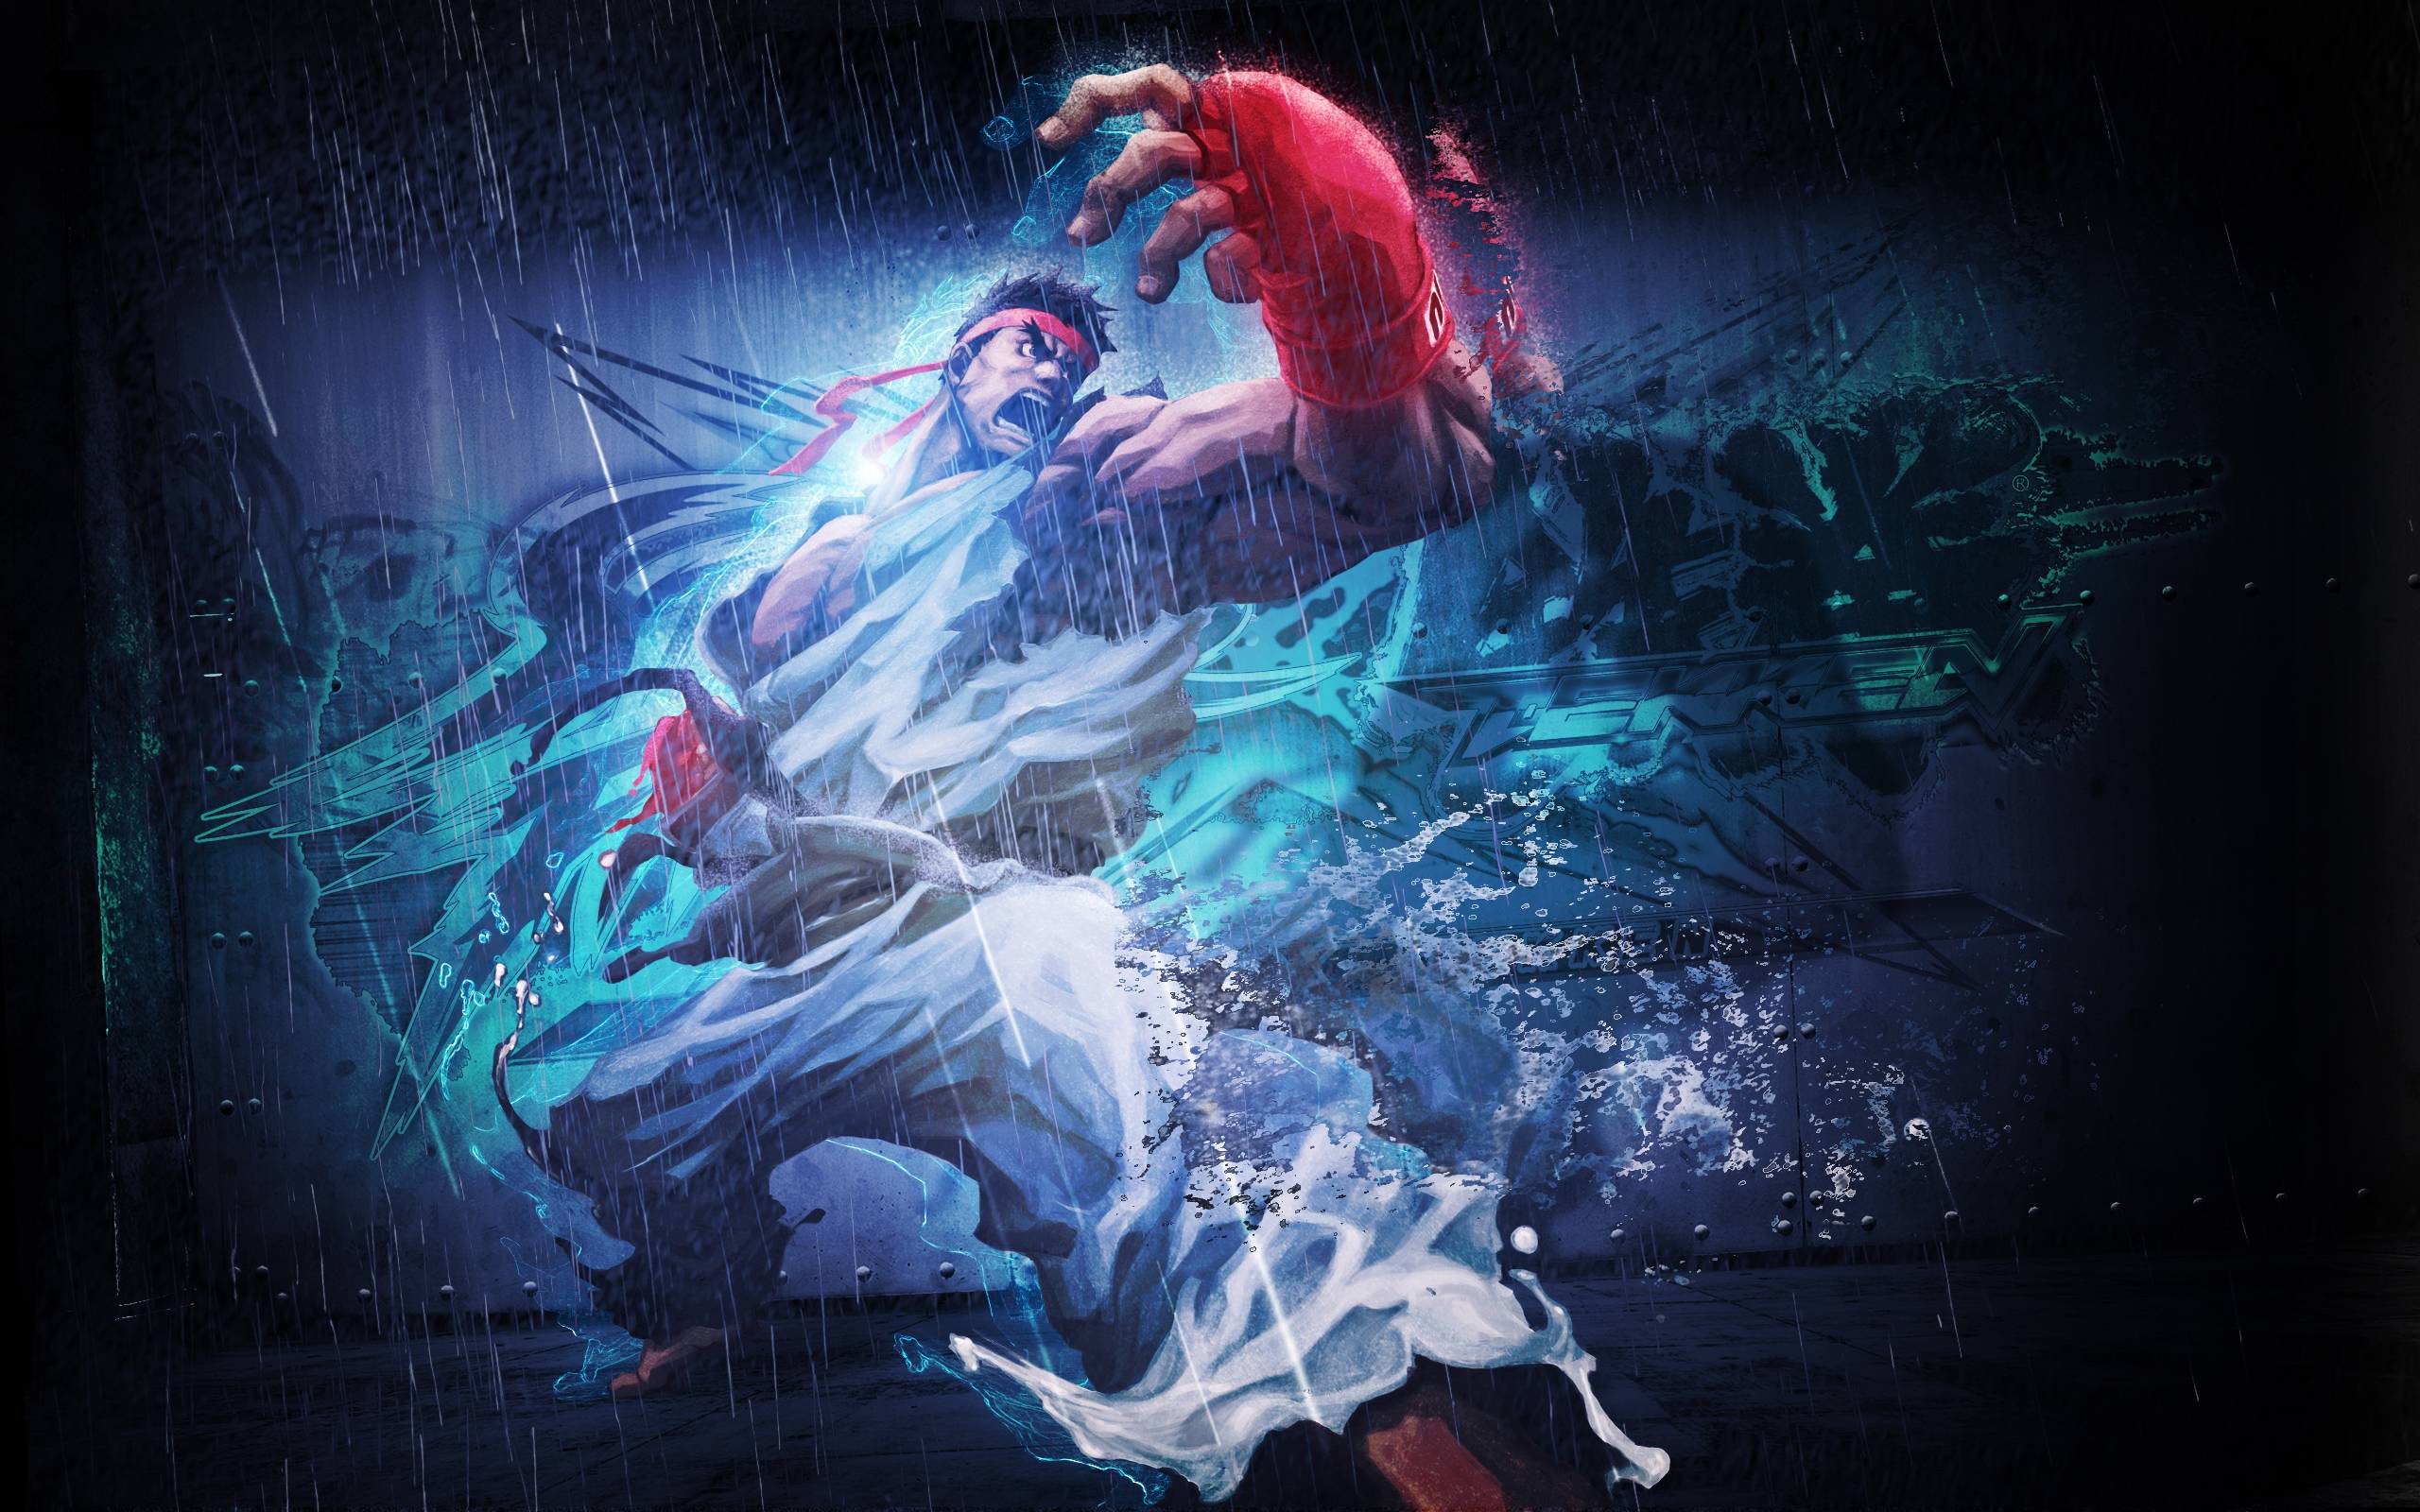 Street Fighter HD Wallpapers - Wallpaper Cave